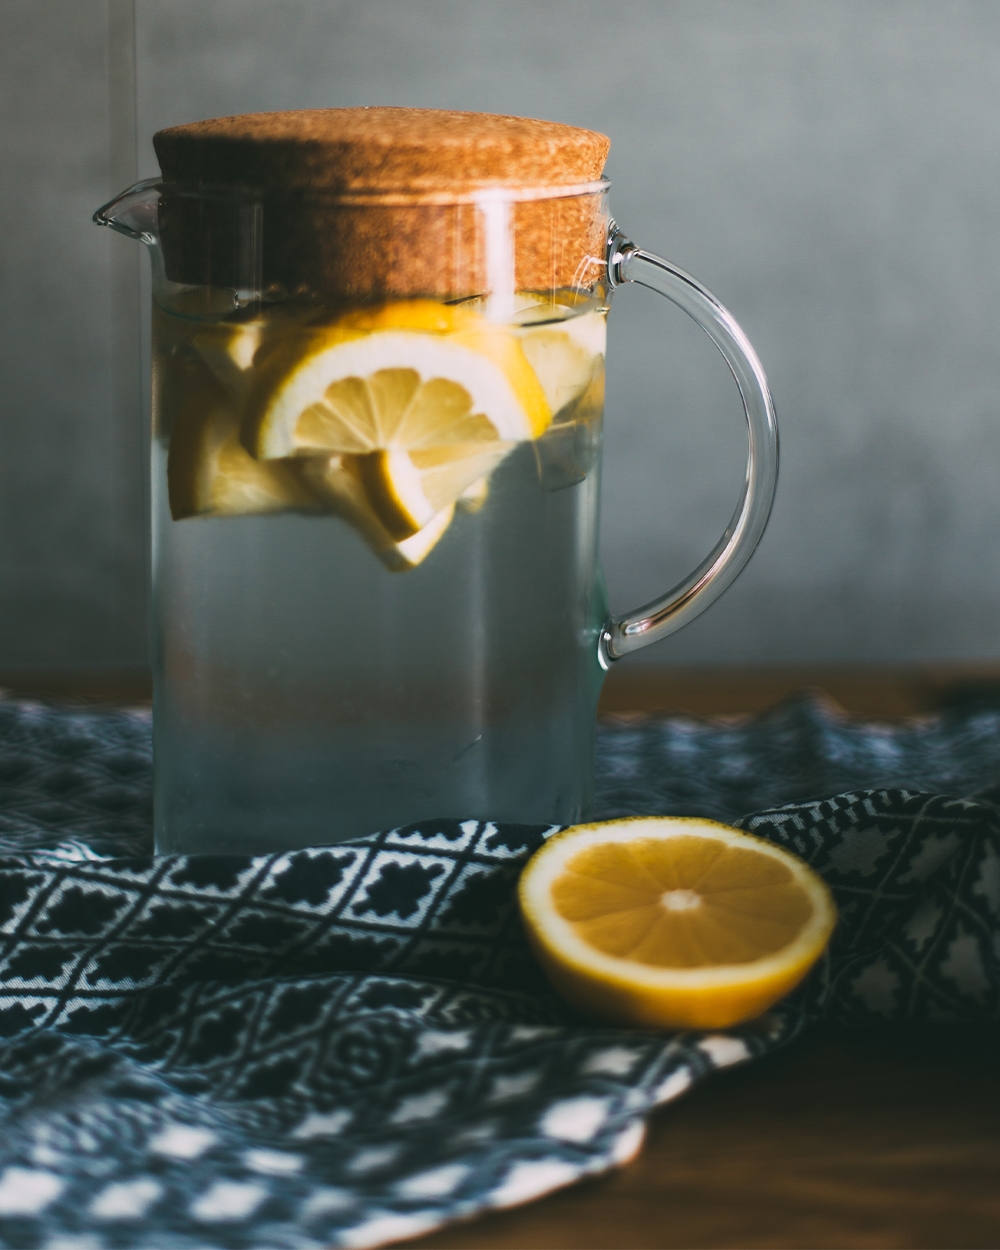 Glass pitcher of lemon water with sliced lemons and a sealed, cork top sitting on a black and white table runner.